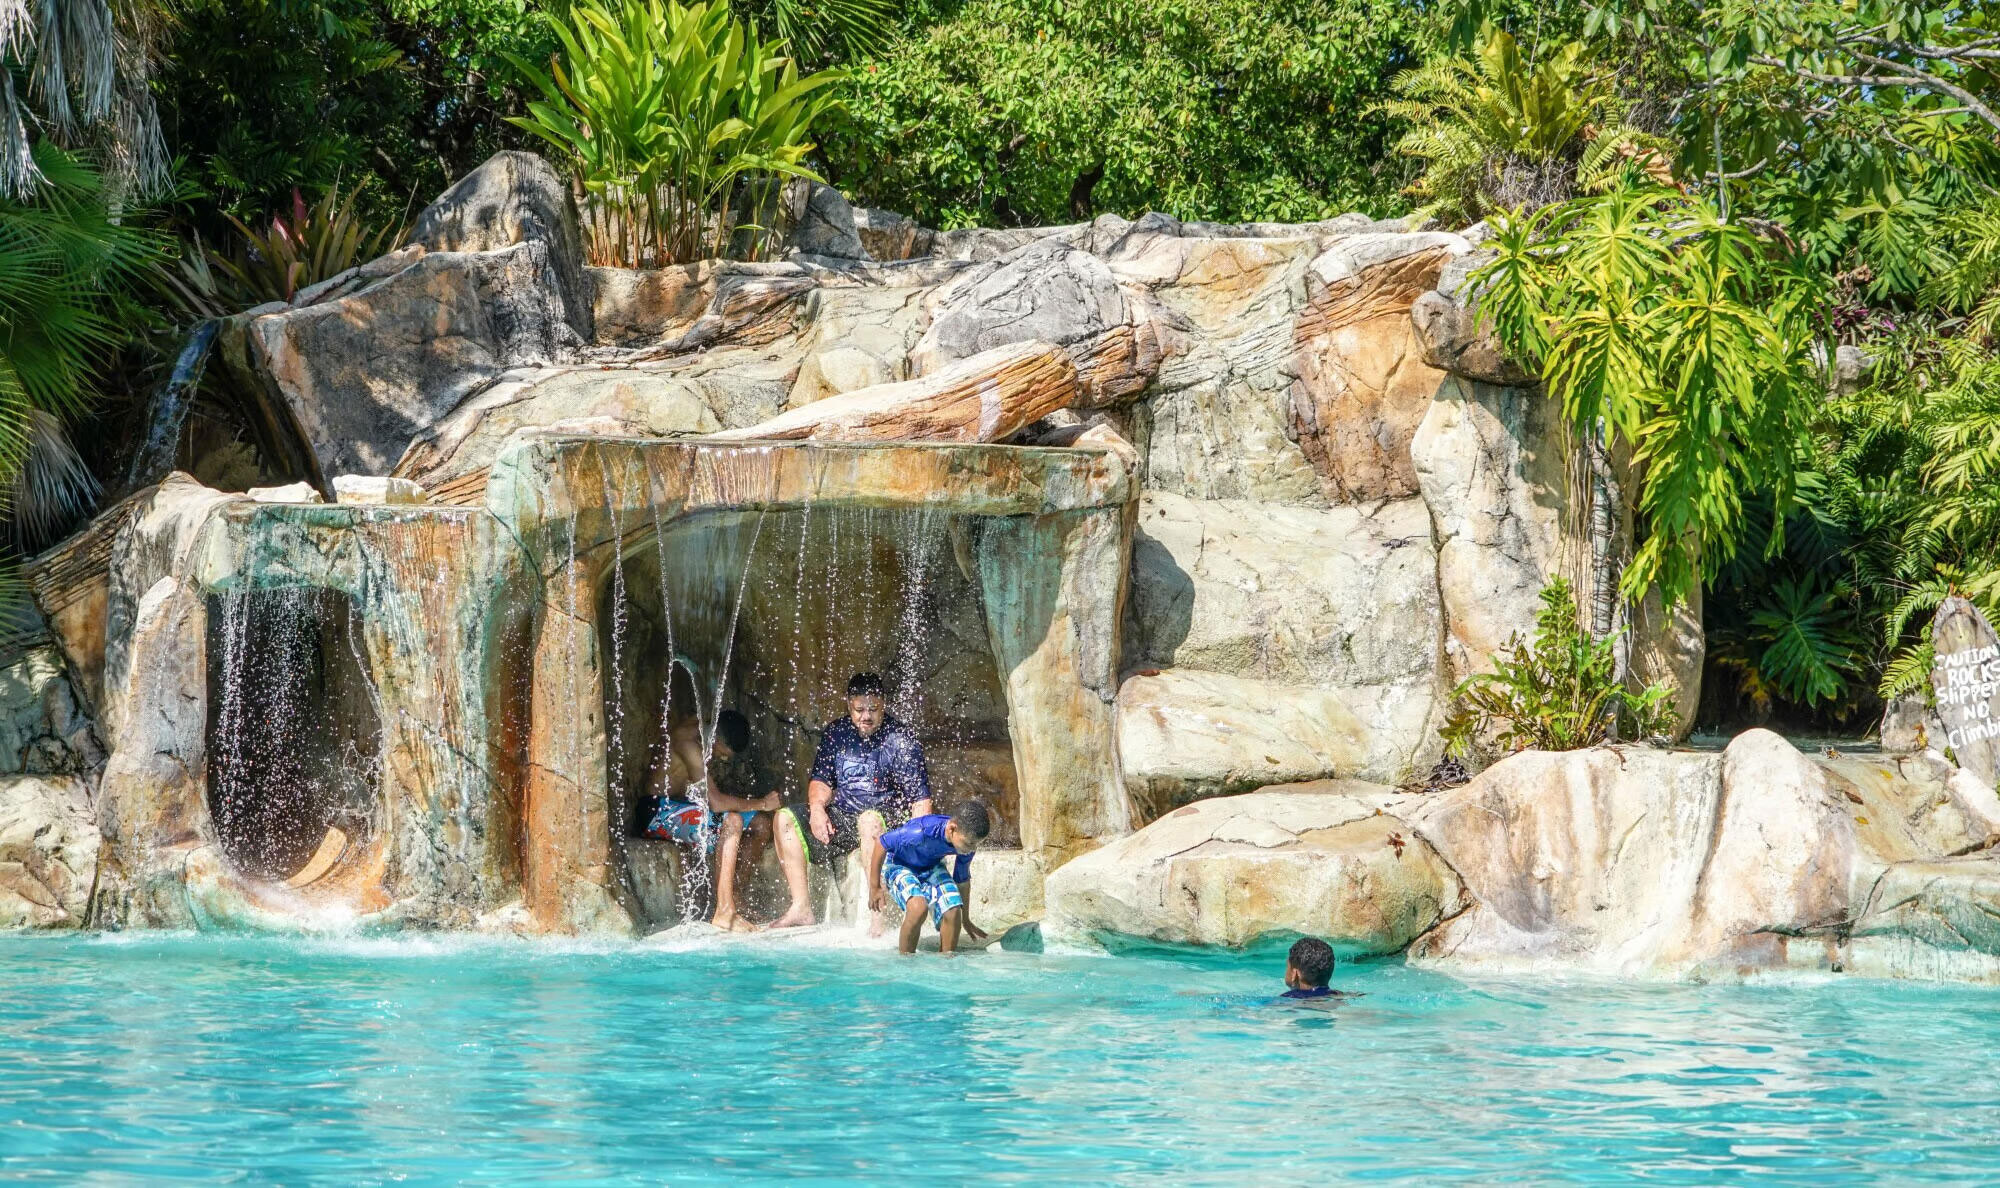 Pool Waterfalls and Grottos: Adding Drama to Your Oasis